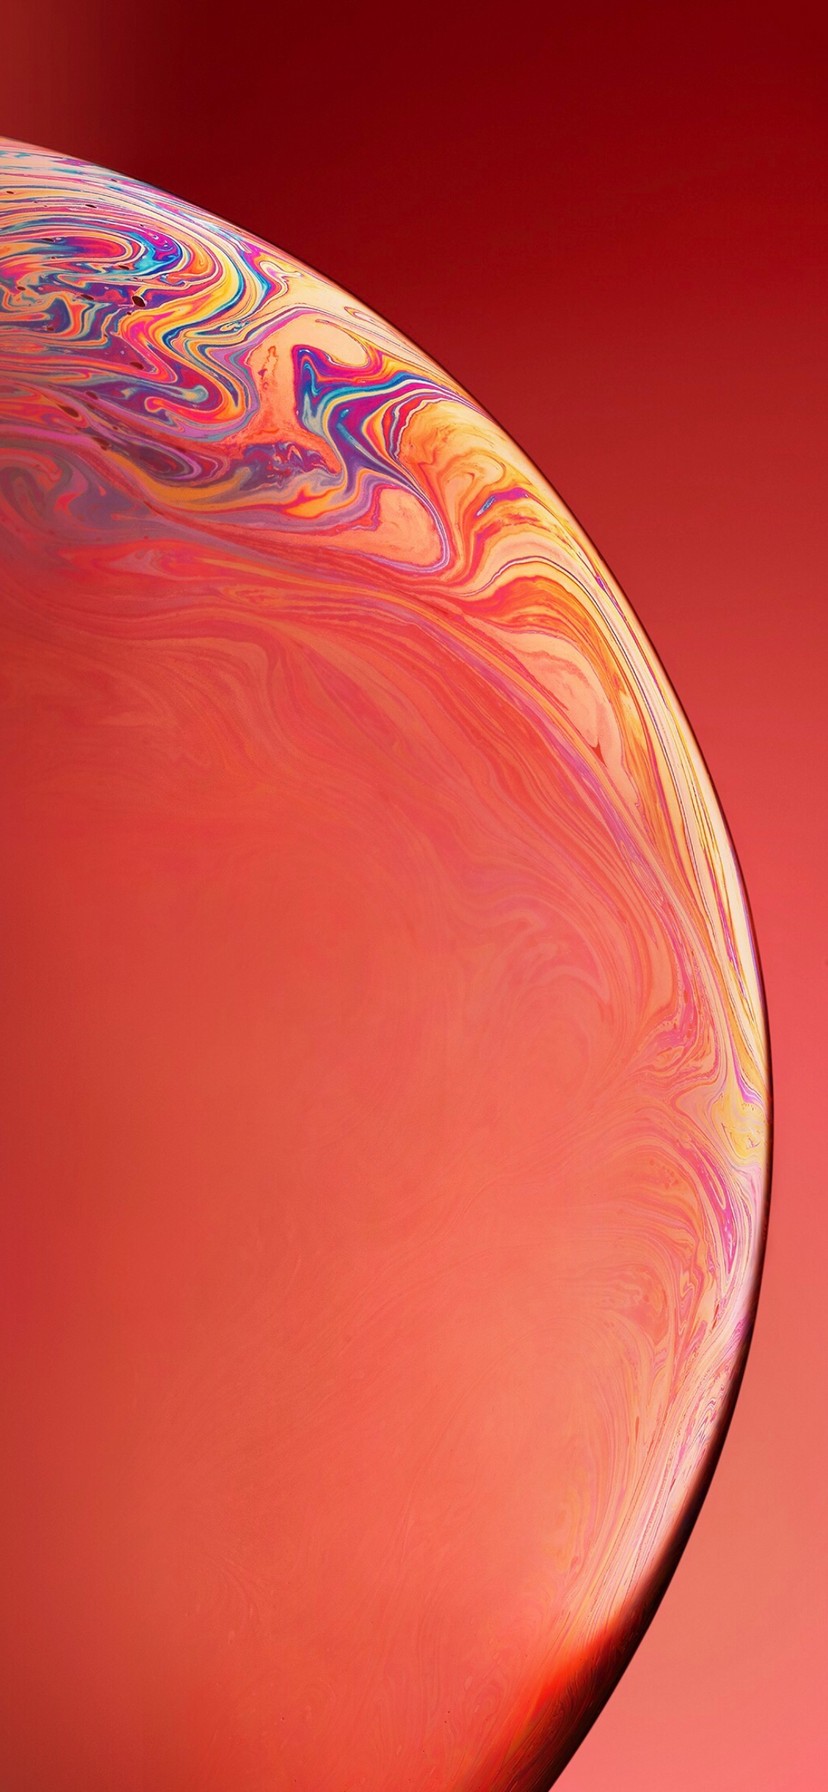 iPhone XR Wallpaper Tumblr with high-resolution 828x1792 pixel. You can set as wallpaper for Apple iPhone X, XS Max, XR, 8, 7, 6, SE, iPad. Enjoy and share your favorite HD wallpapers and background images